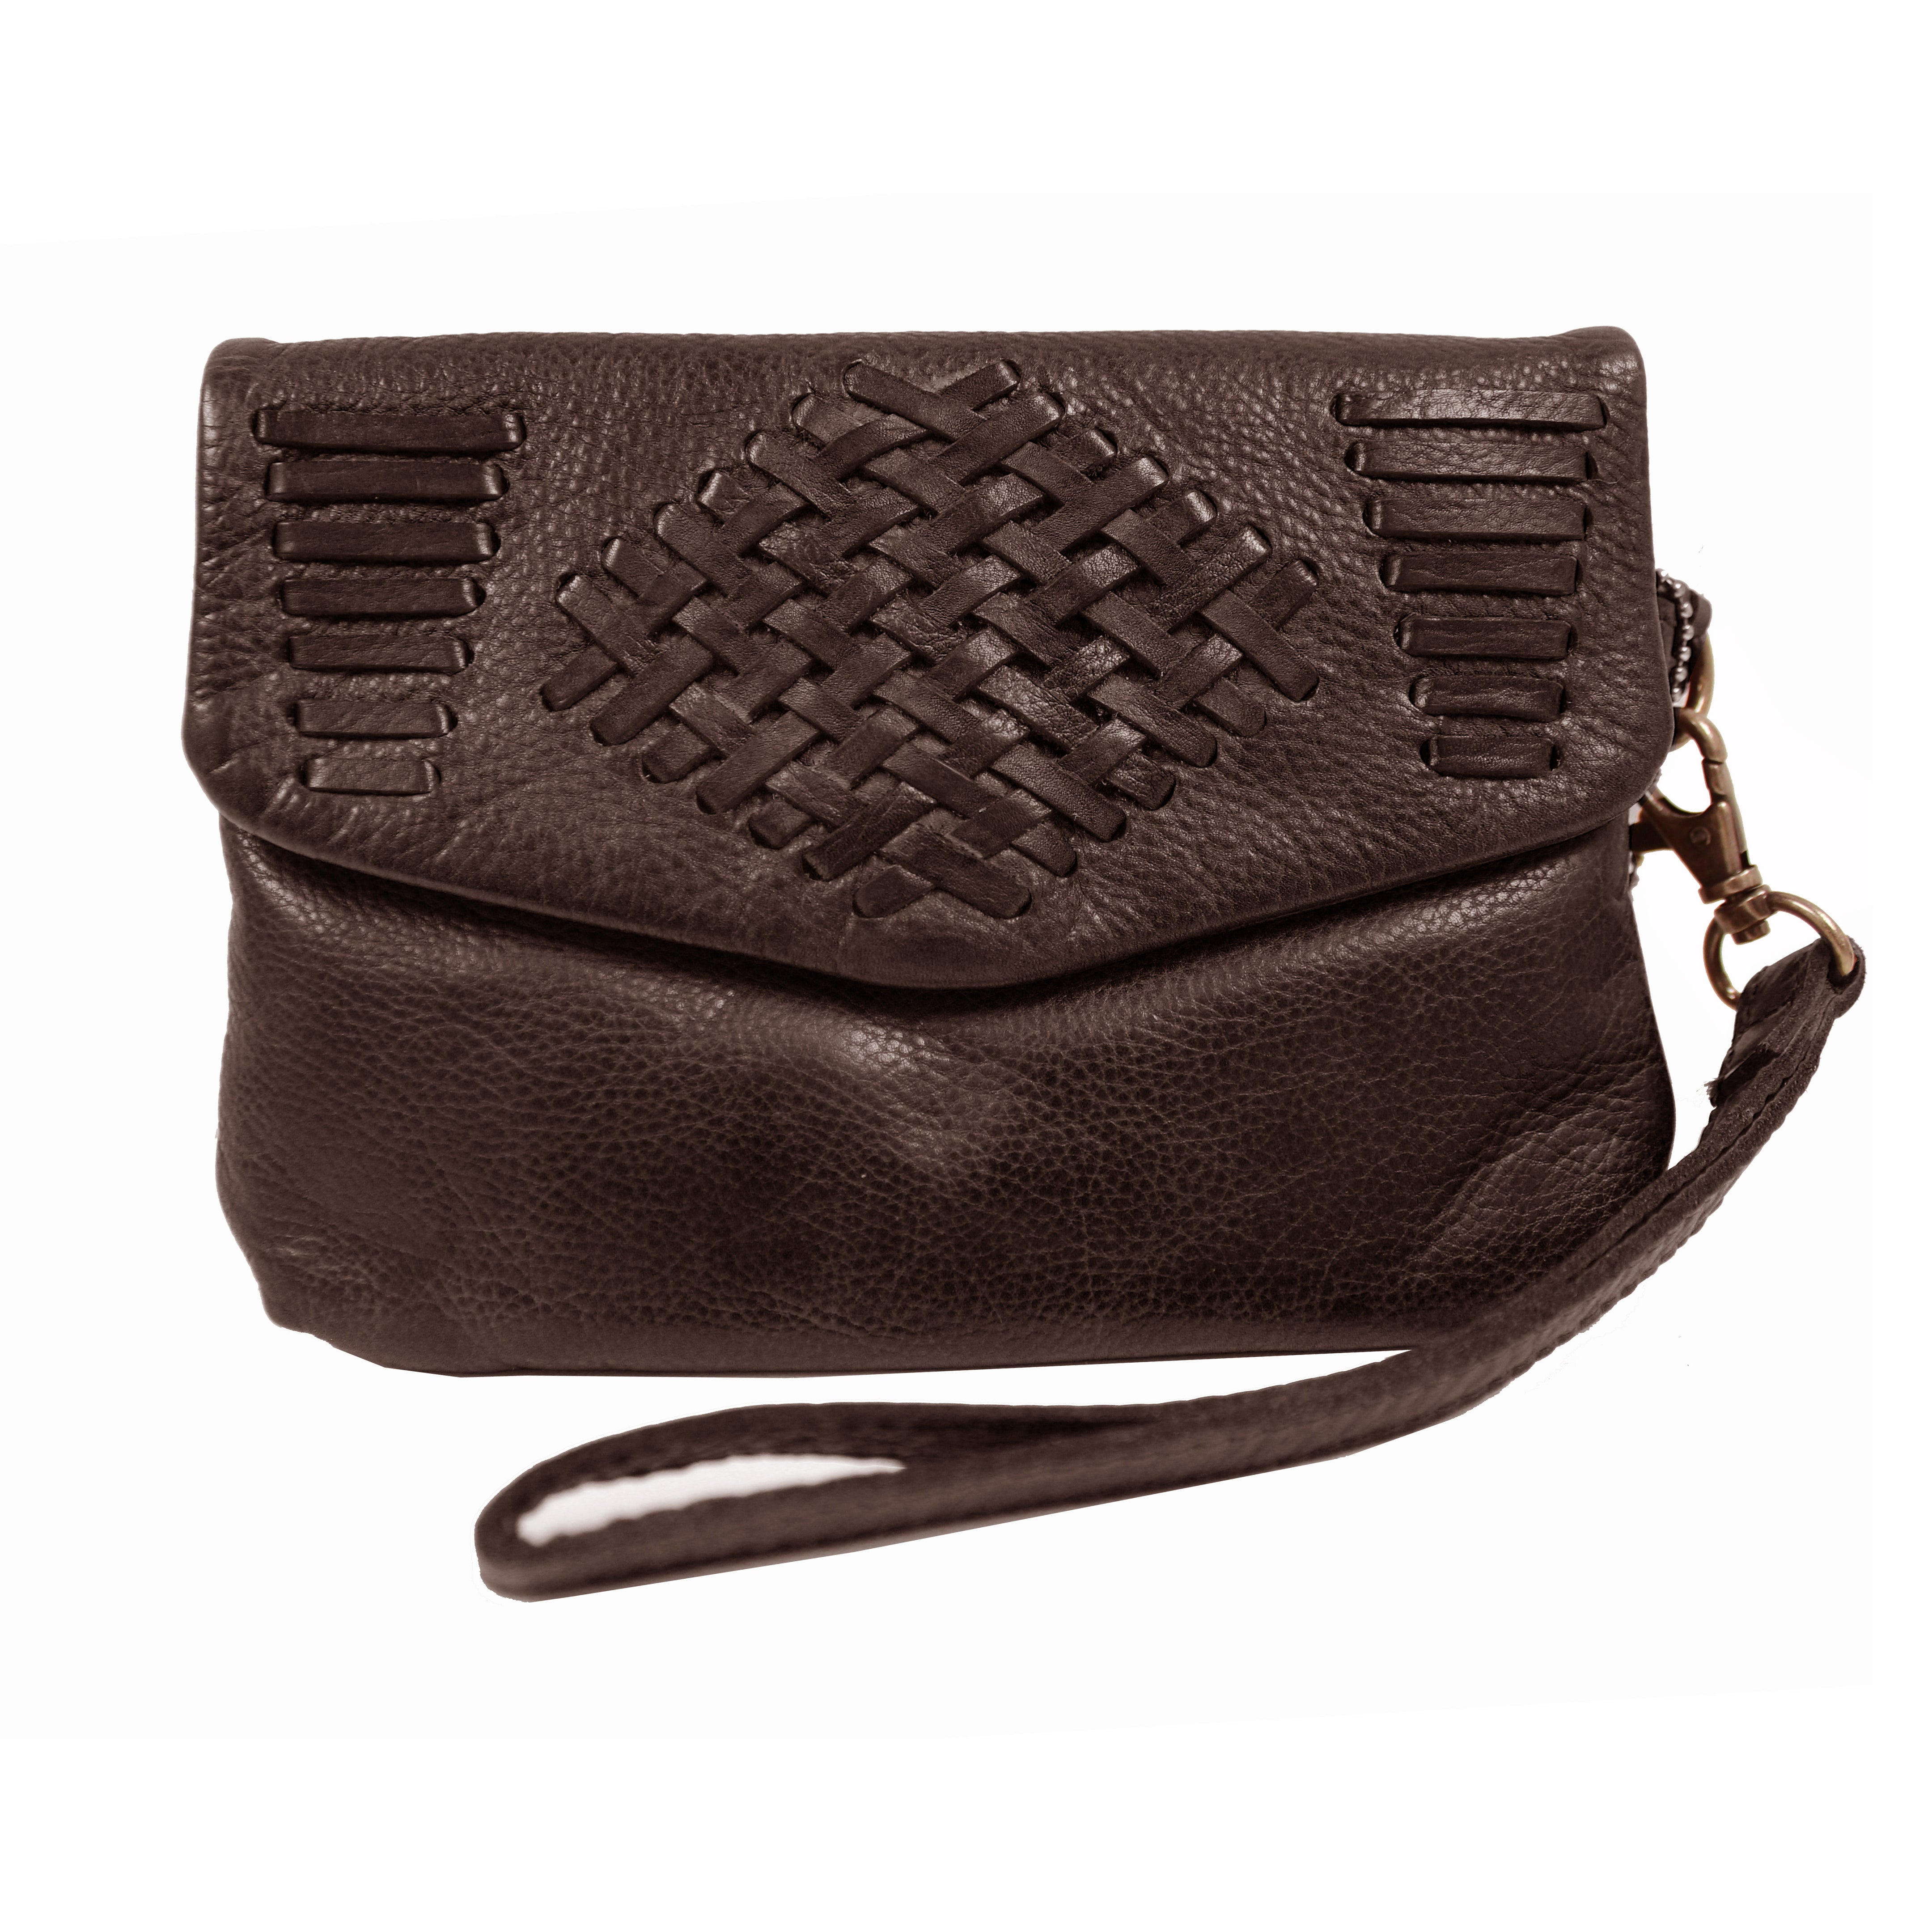 chocolate brown woven leather small clutch bag with wrist strap